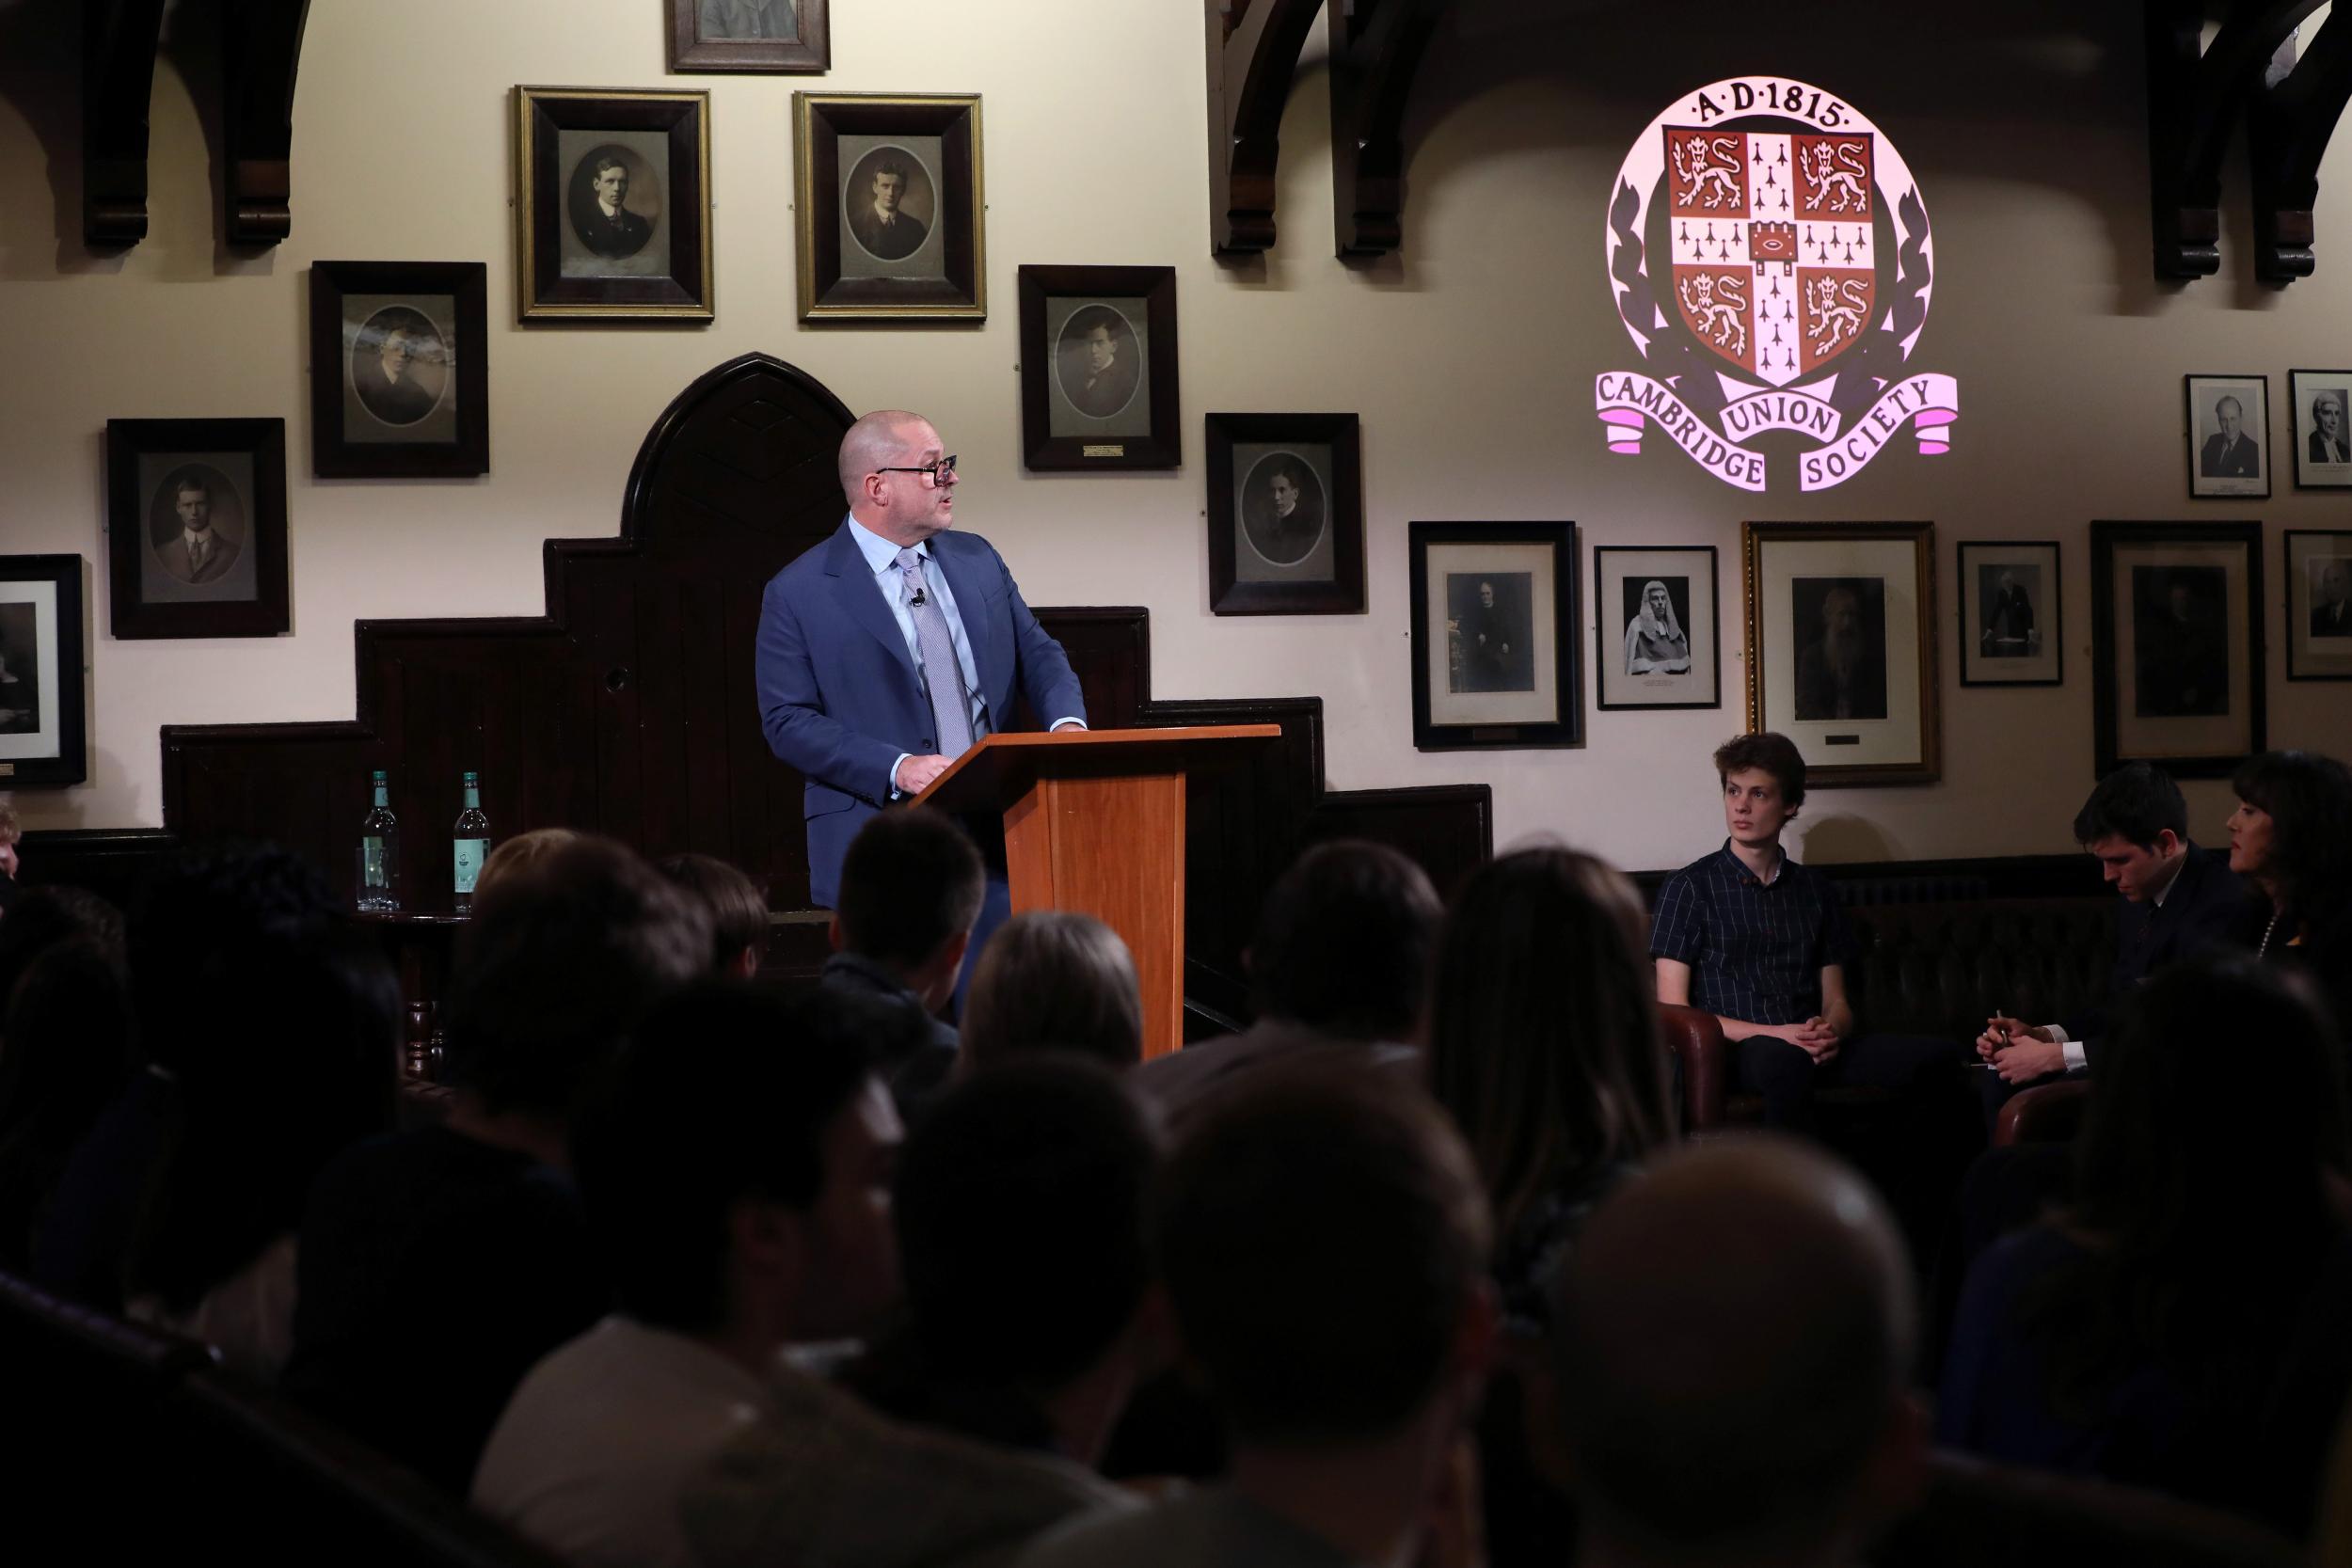 Jony Ive addressed an audience of mostly students at the Cambridge Union on 19 November, 2018